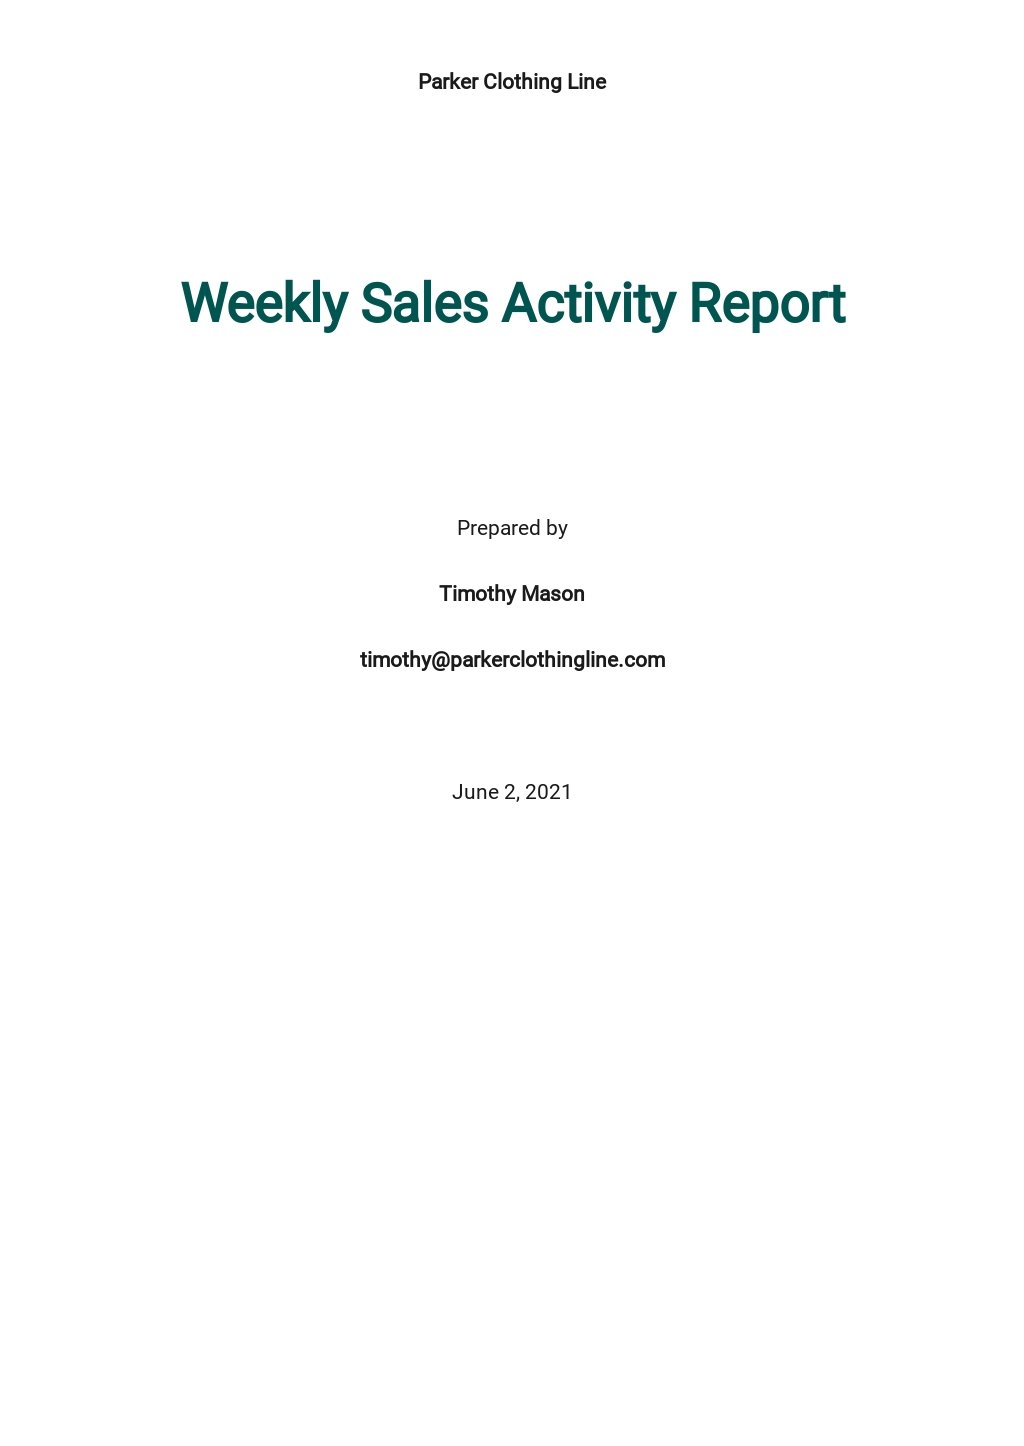 Weekly Sales Activity Report Template.jpe